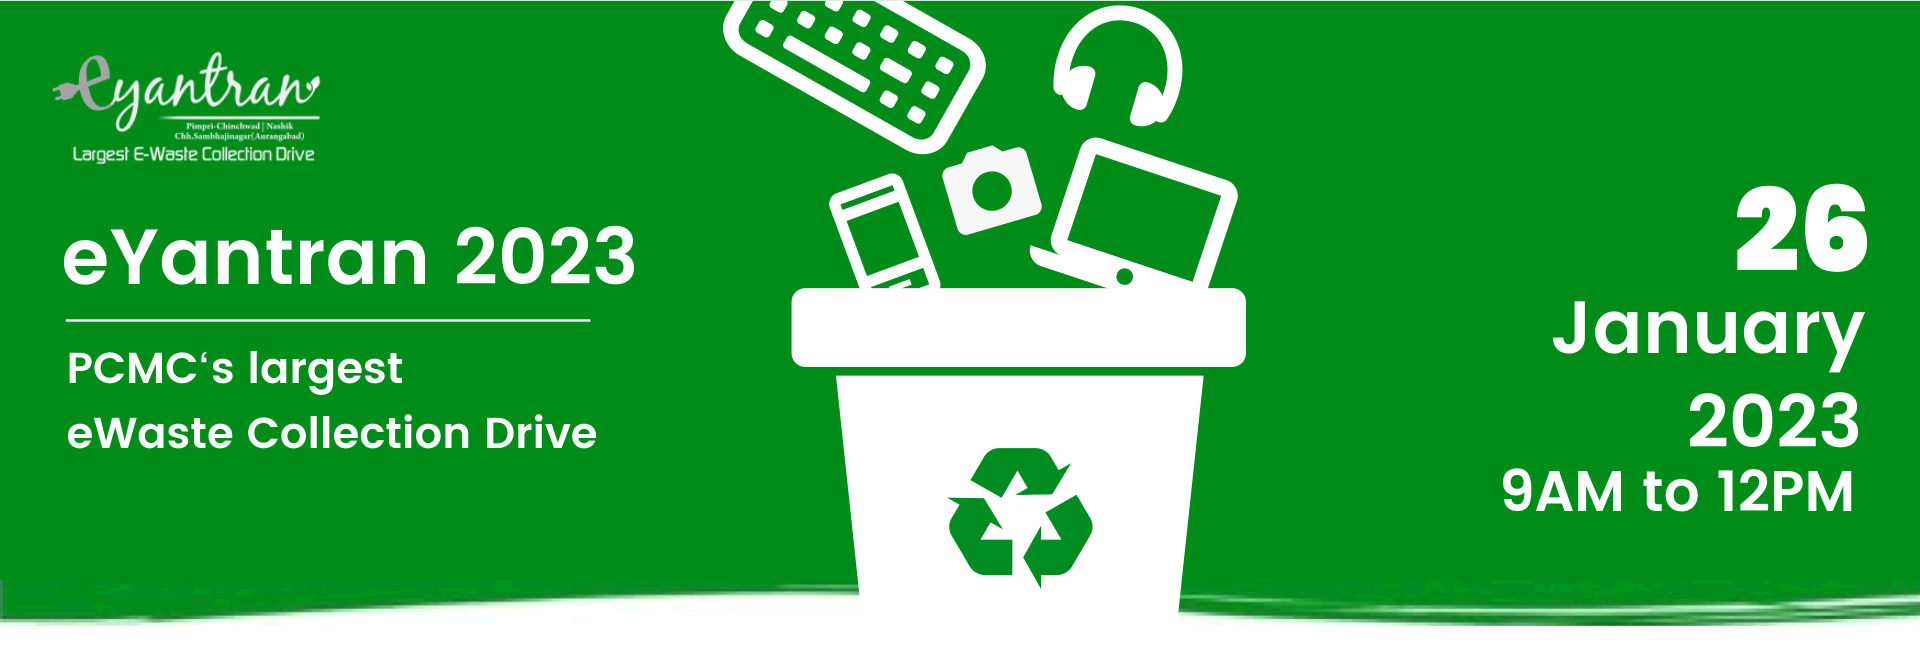 eYantran 2023 - PCMC's Largest e-waste Collection Drive